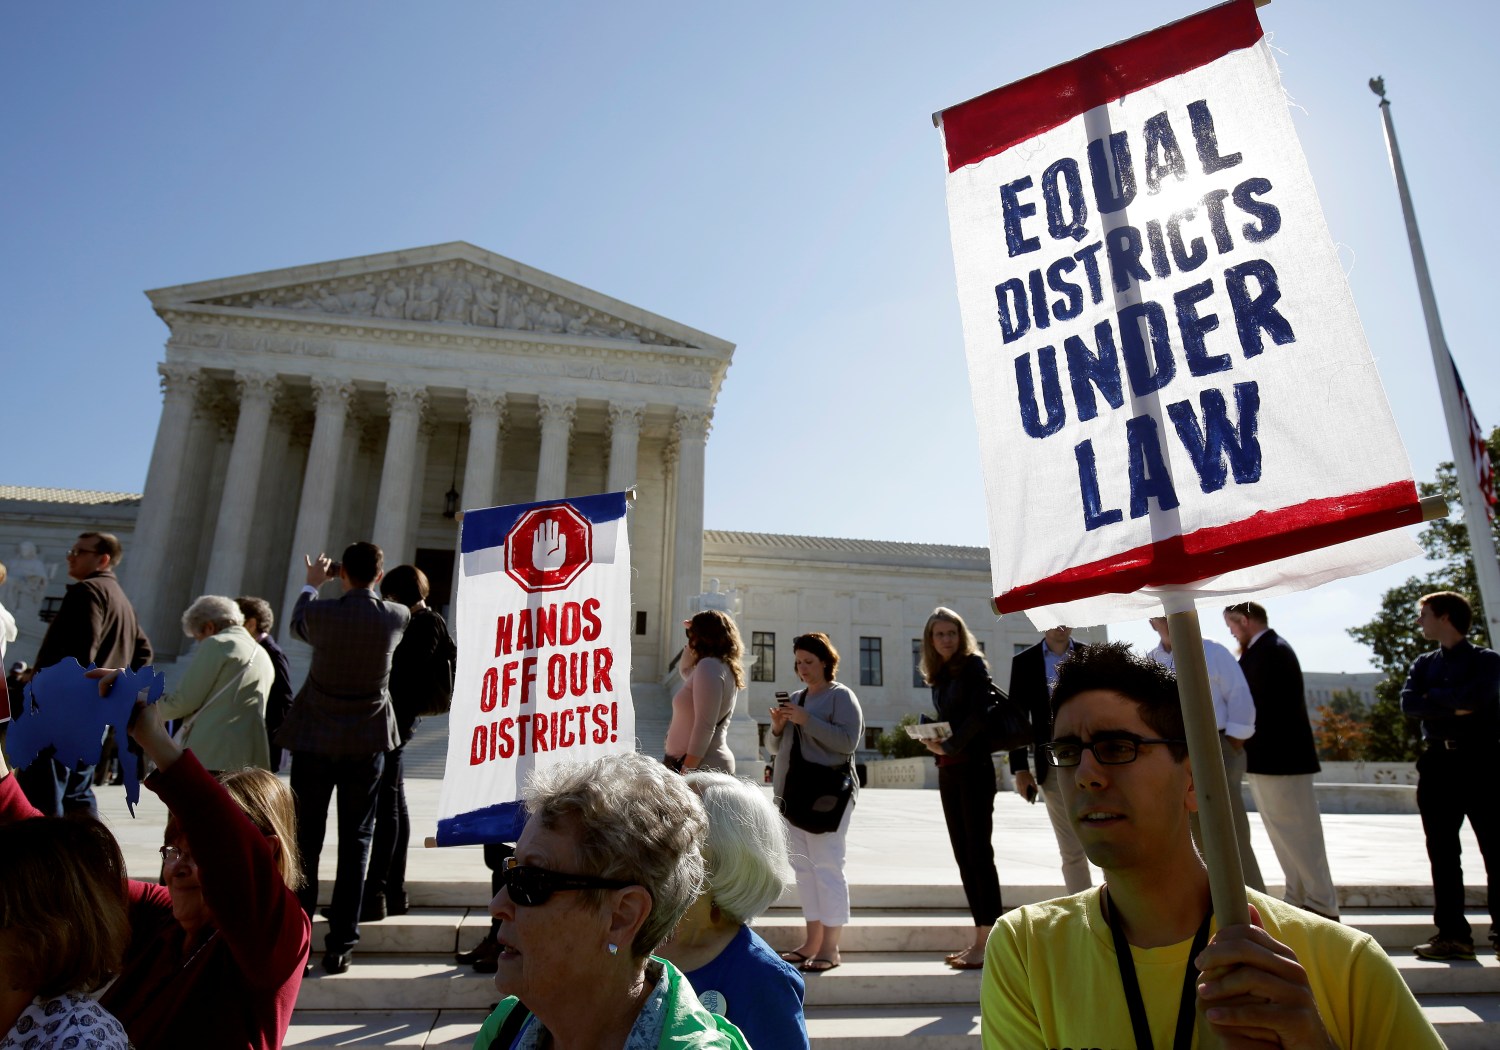 Demonstrators rally during oral arguments in Gill v. Whitford, a case about partisan gerrymandering in electoral districts, at the Supreme Court in Washington